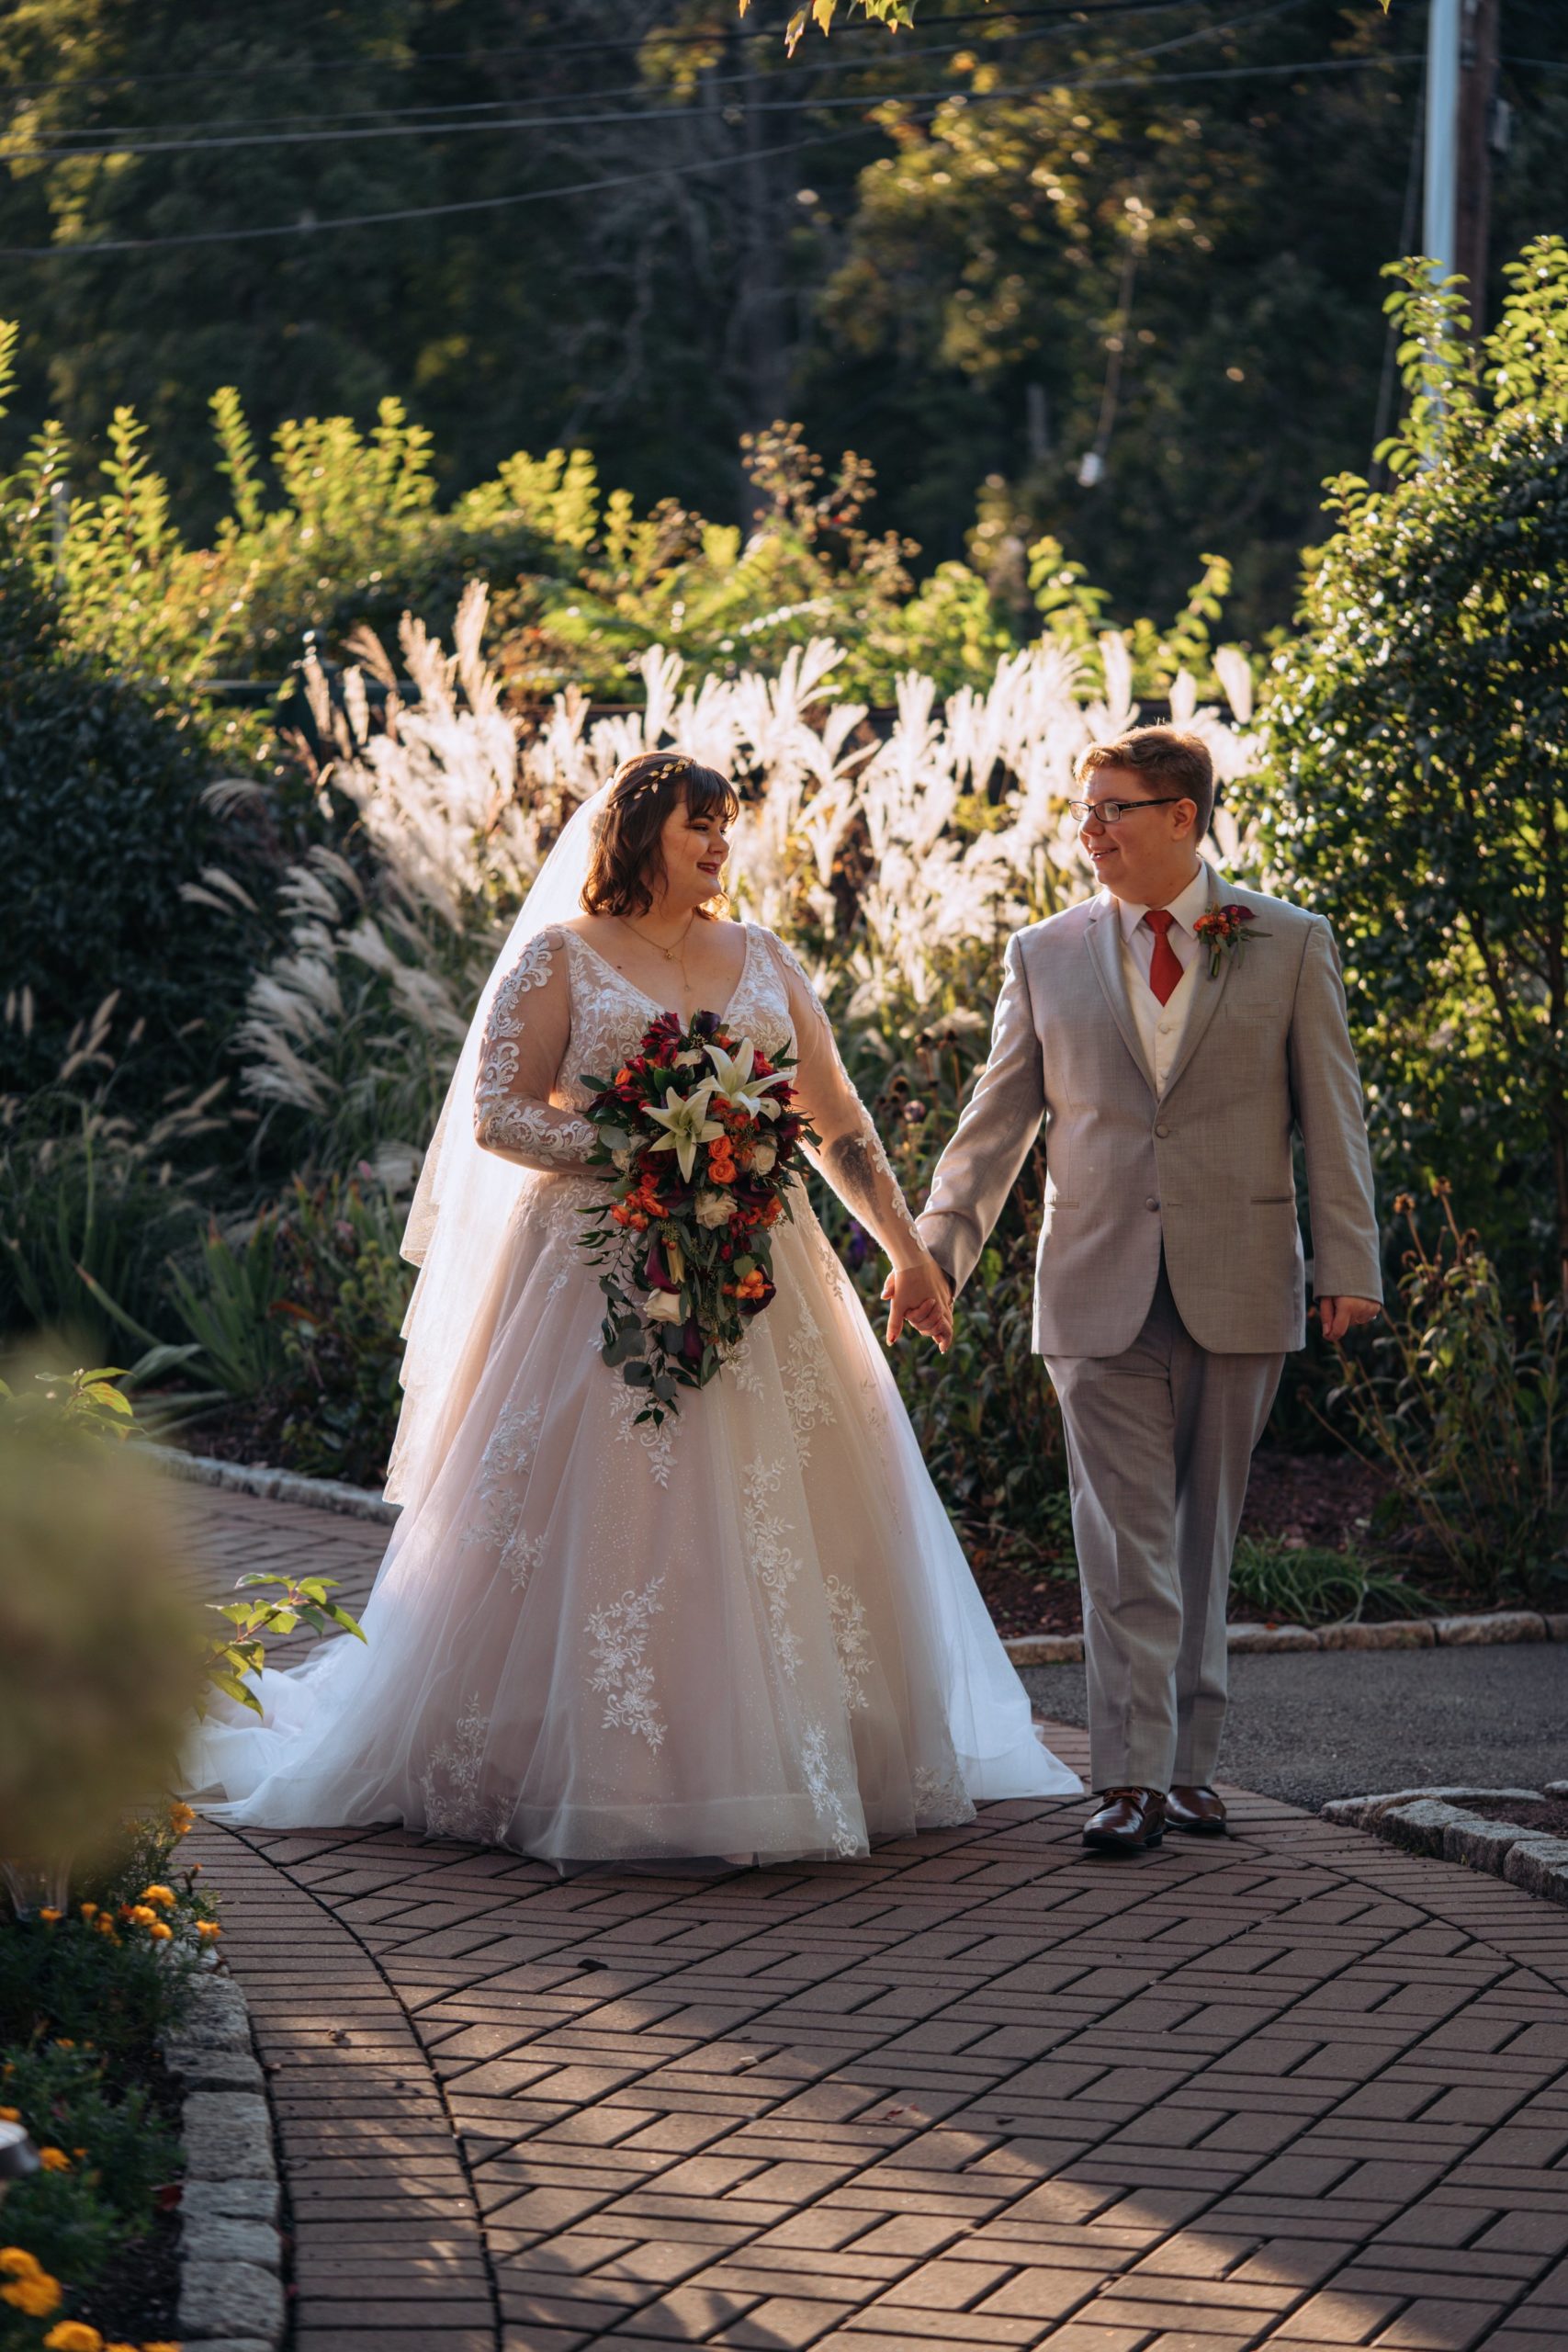 A white, cis-gendered woman in a wedding dress and veil holds hands with a white trans man in a gray suit. They are backlit and are walking toward the camera.